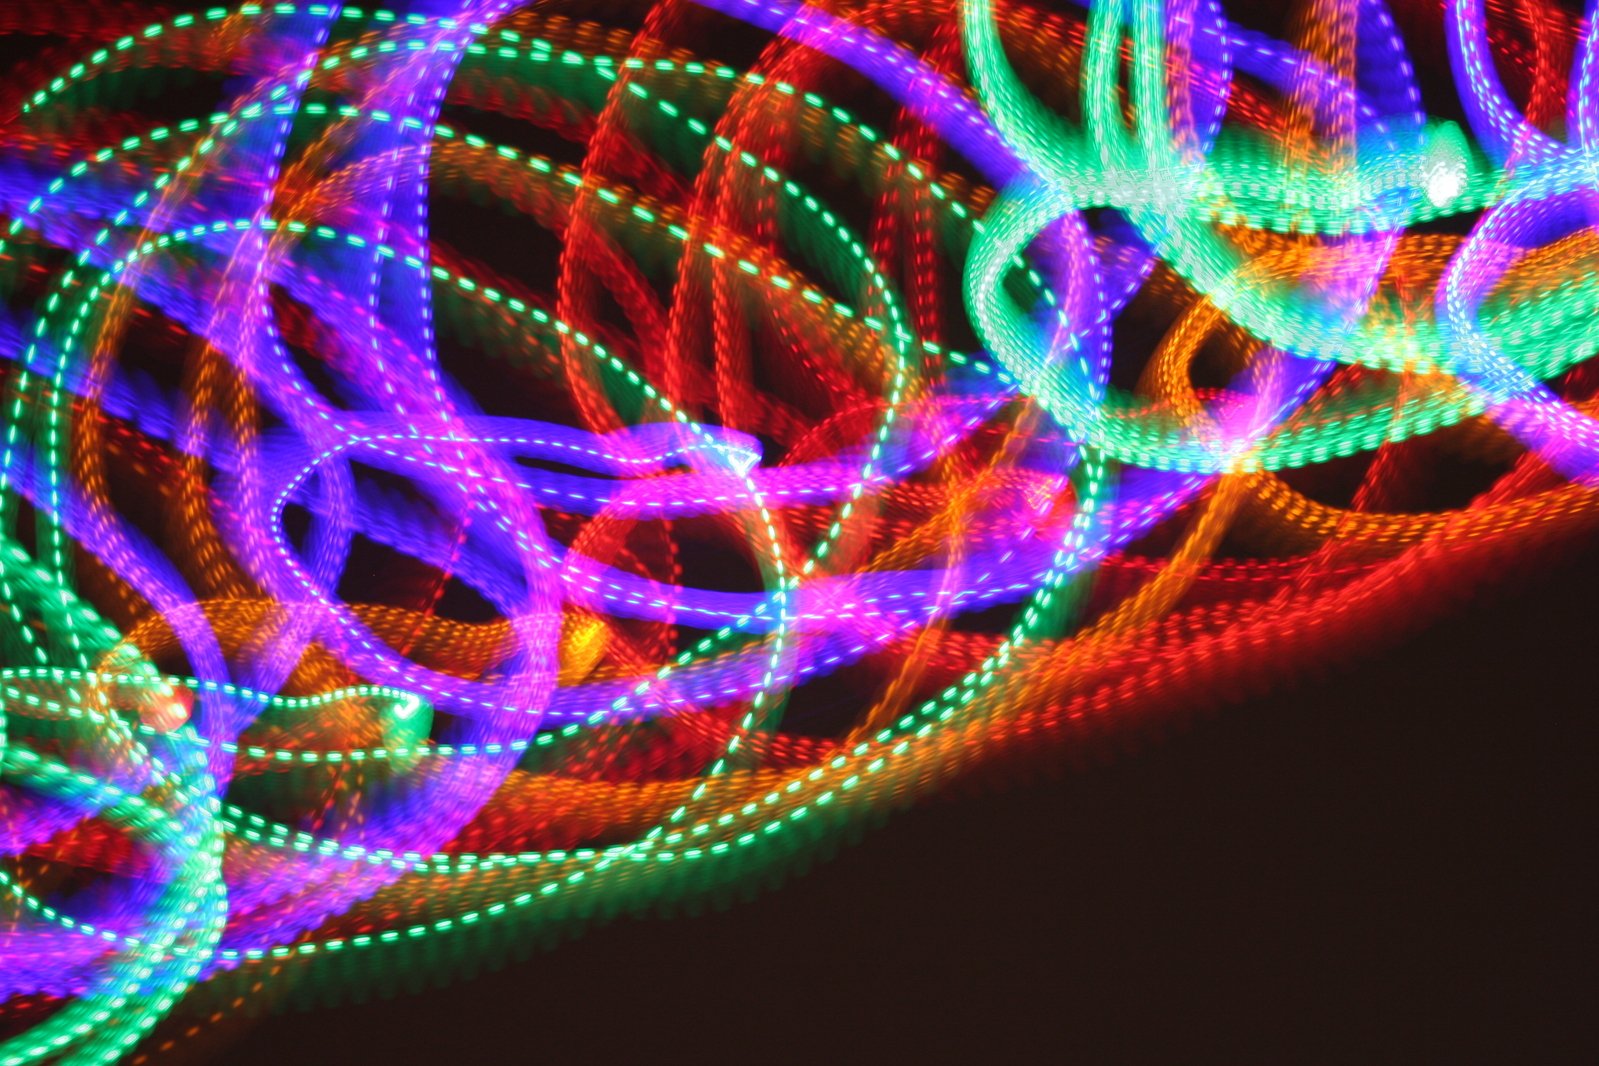 a close up of some glowing rings on a dark background